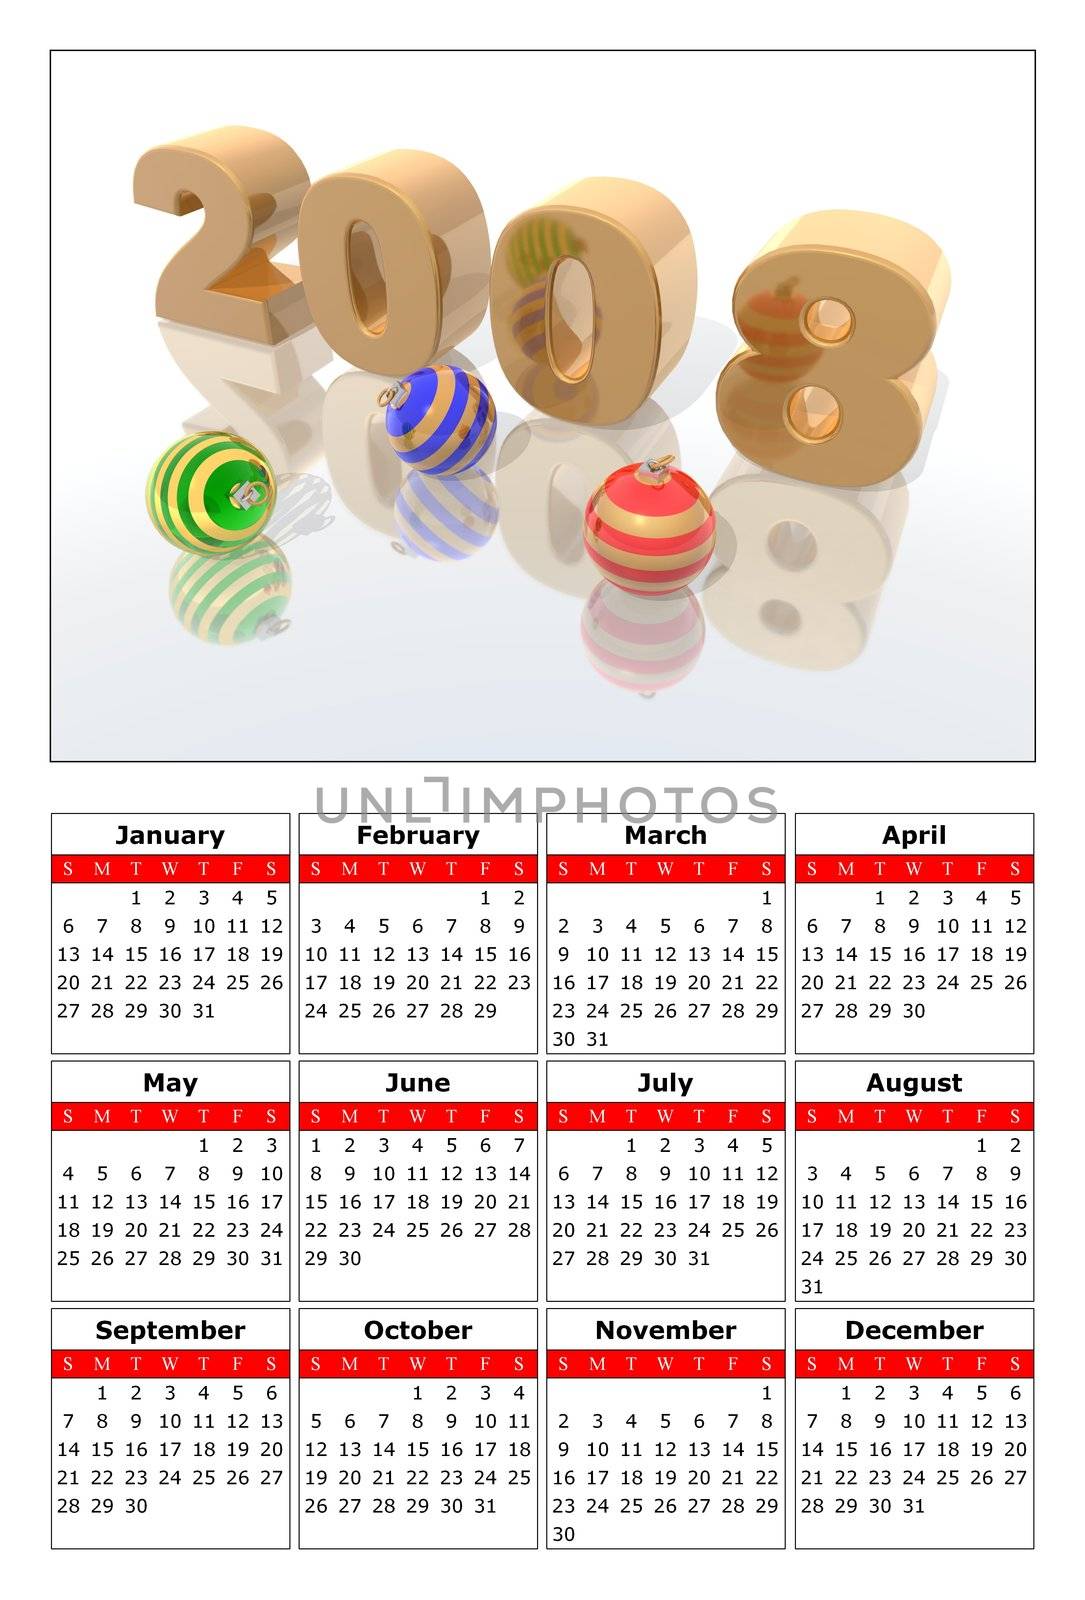 a new calendar to celebrate the new year 2008